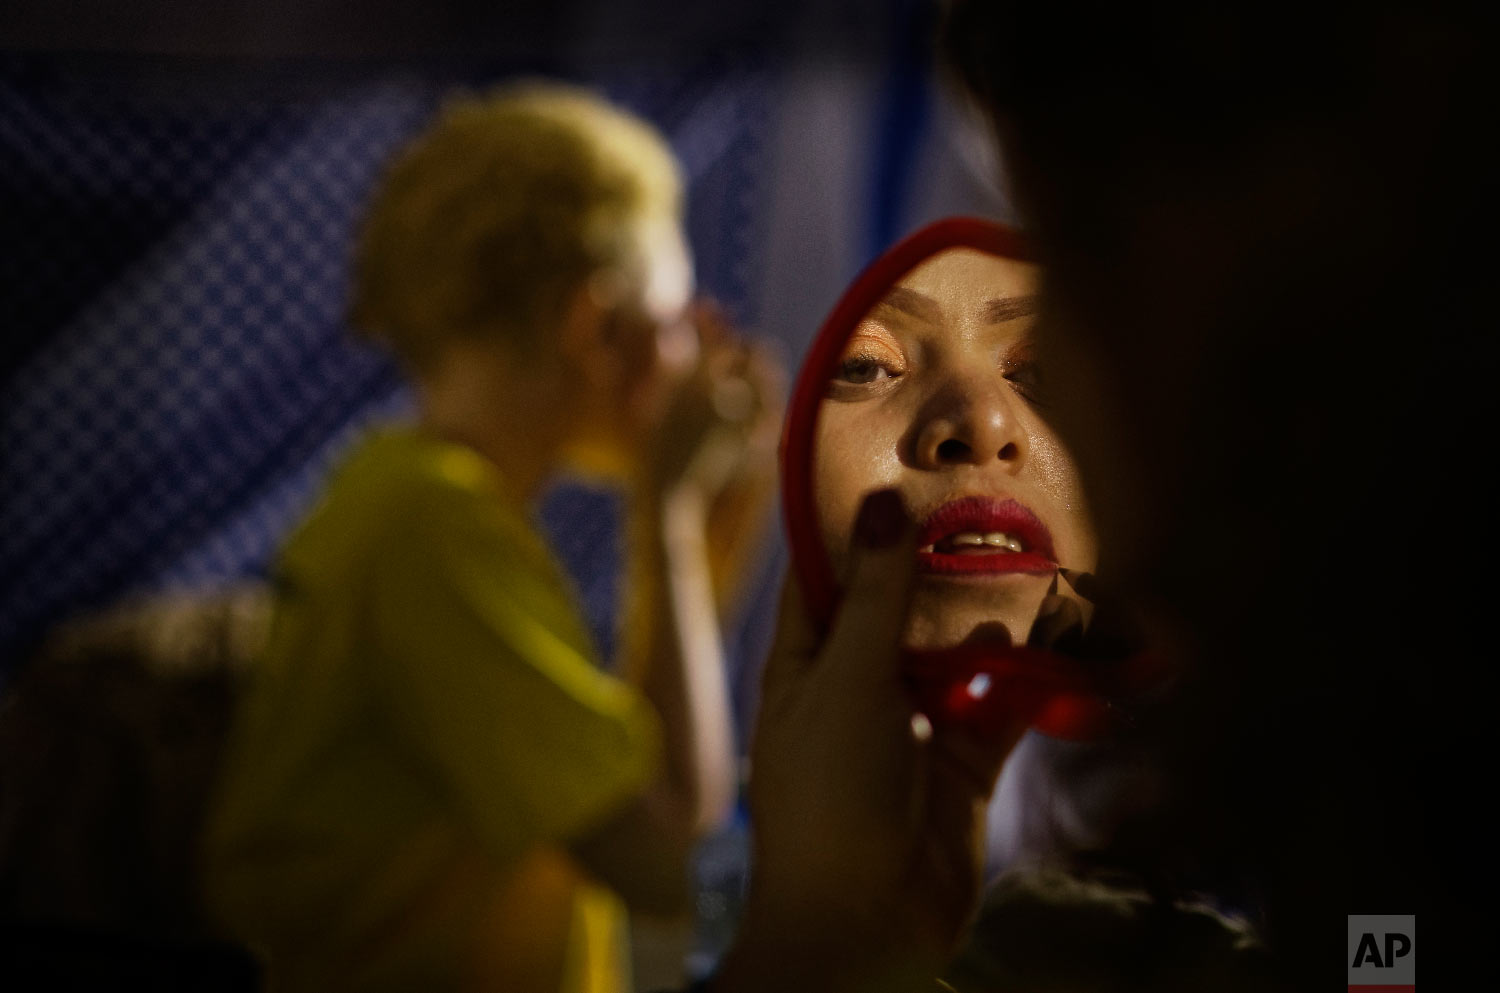  A contestant checks her makeup in a mirror as she prepares to perform in the "Mr. &amp; Miss Albinism East Africa" contest, organized by the Albinism Society of Kenya, in Nairobi, Kenya on Nov. 30, 2018. (AP Photo/Ben Curtis) 